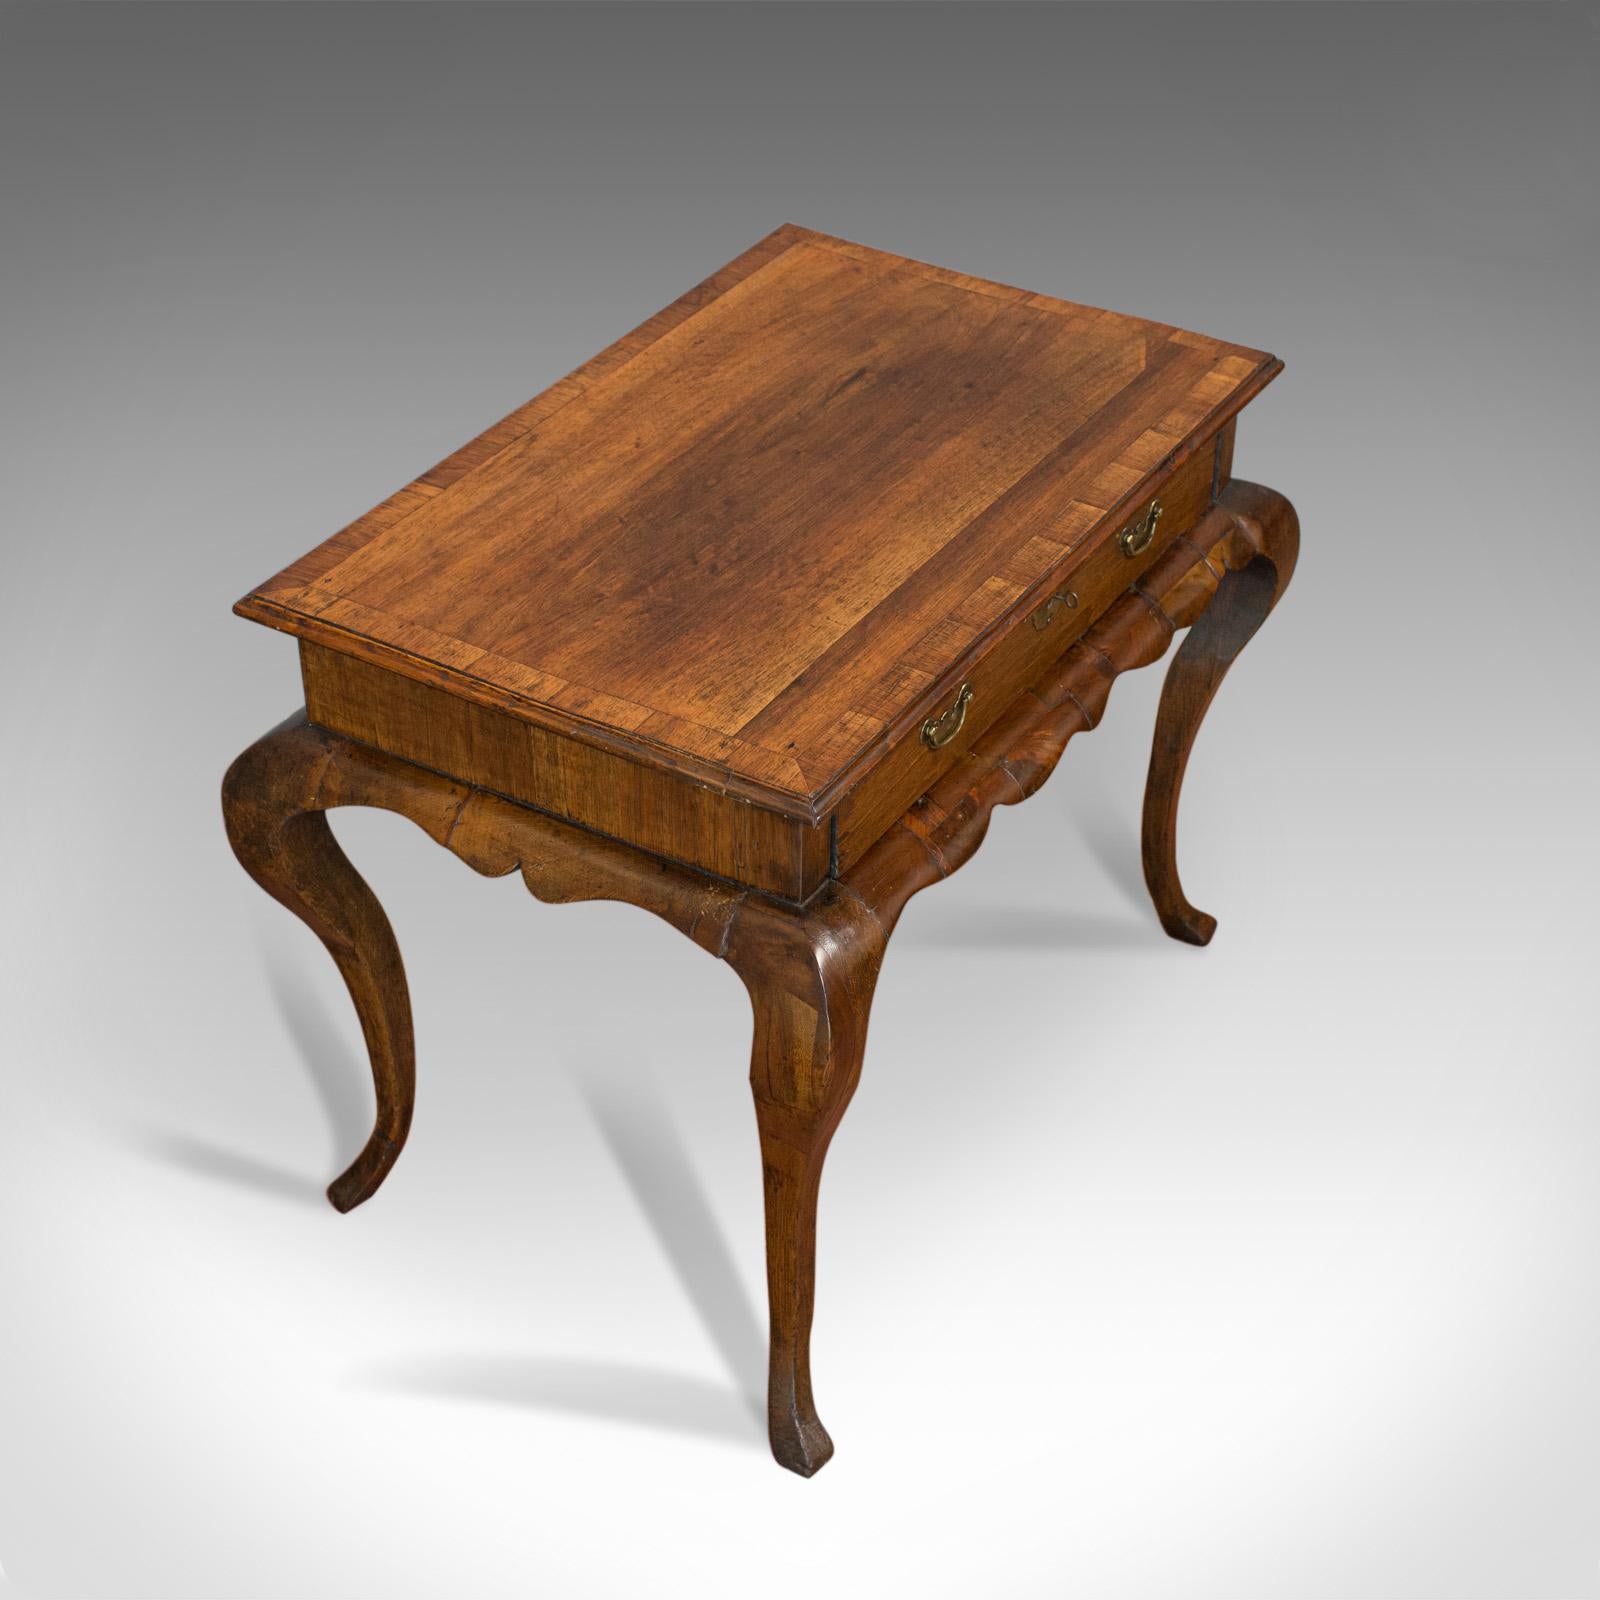 Antique Centre Table, Flemish, Mahogany, Oak, Occasional, Dutch, 18th Century In Good Condition For Sale In Hele, Devon, GB